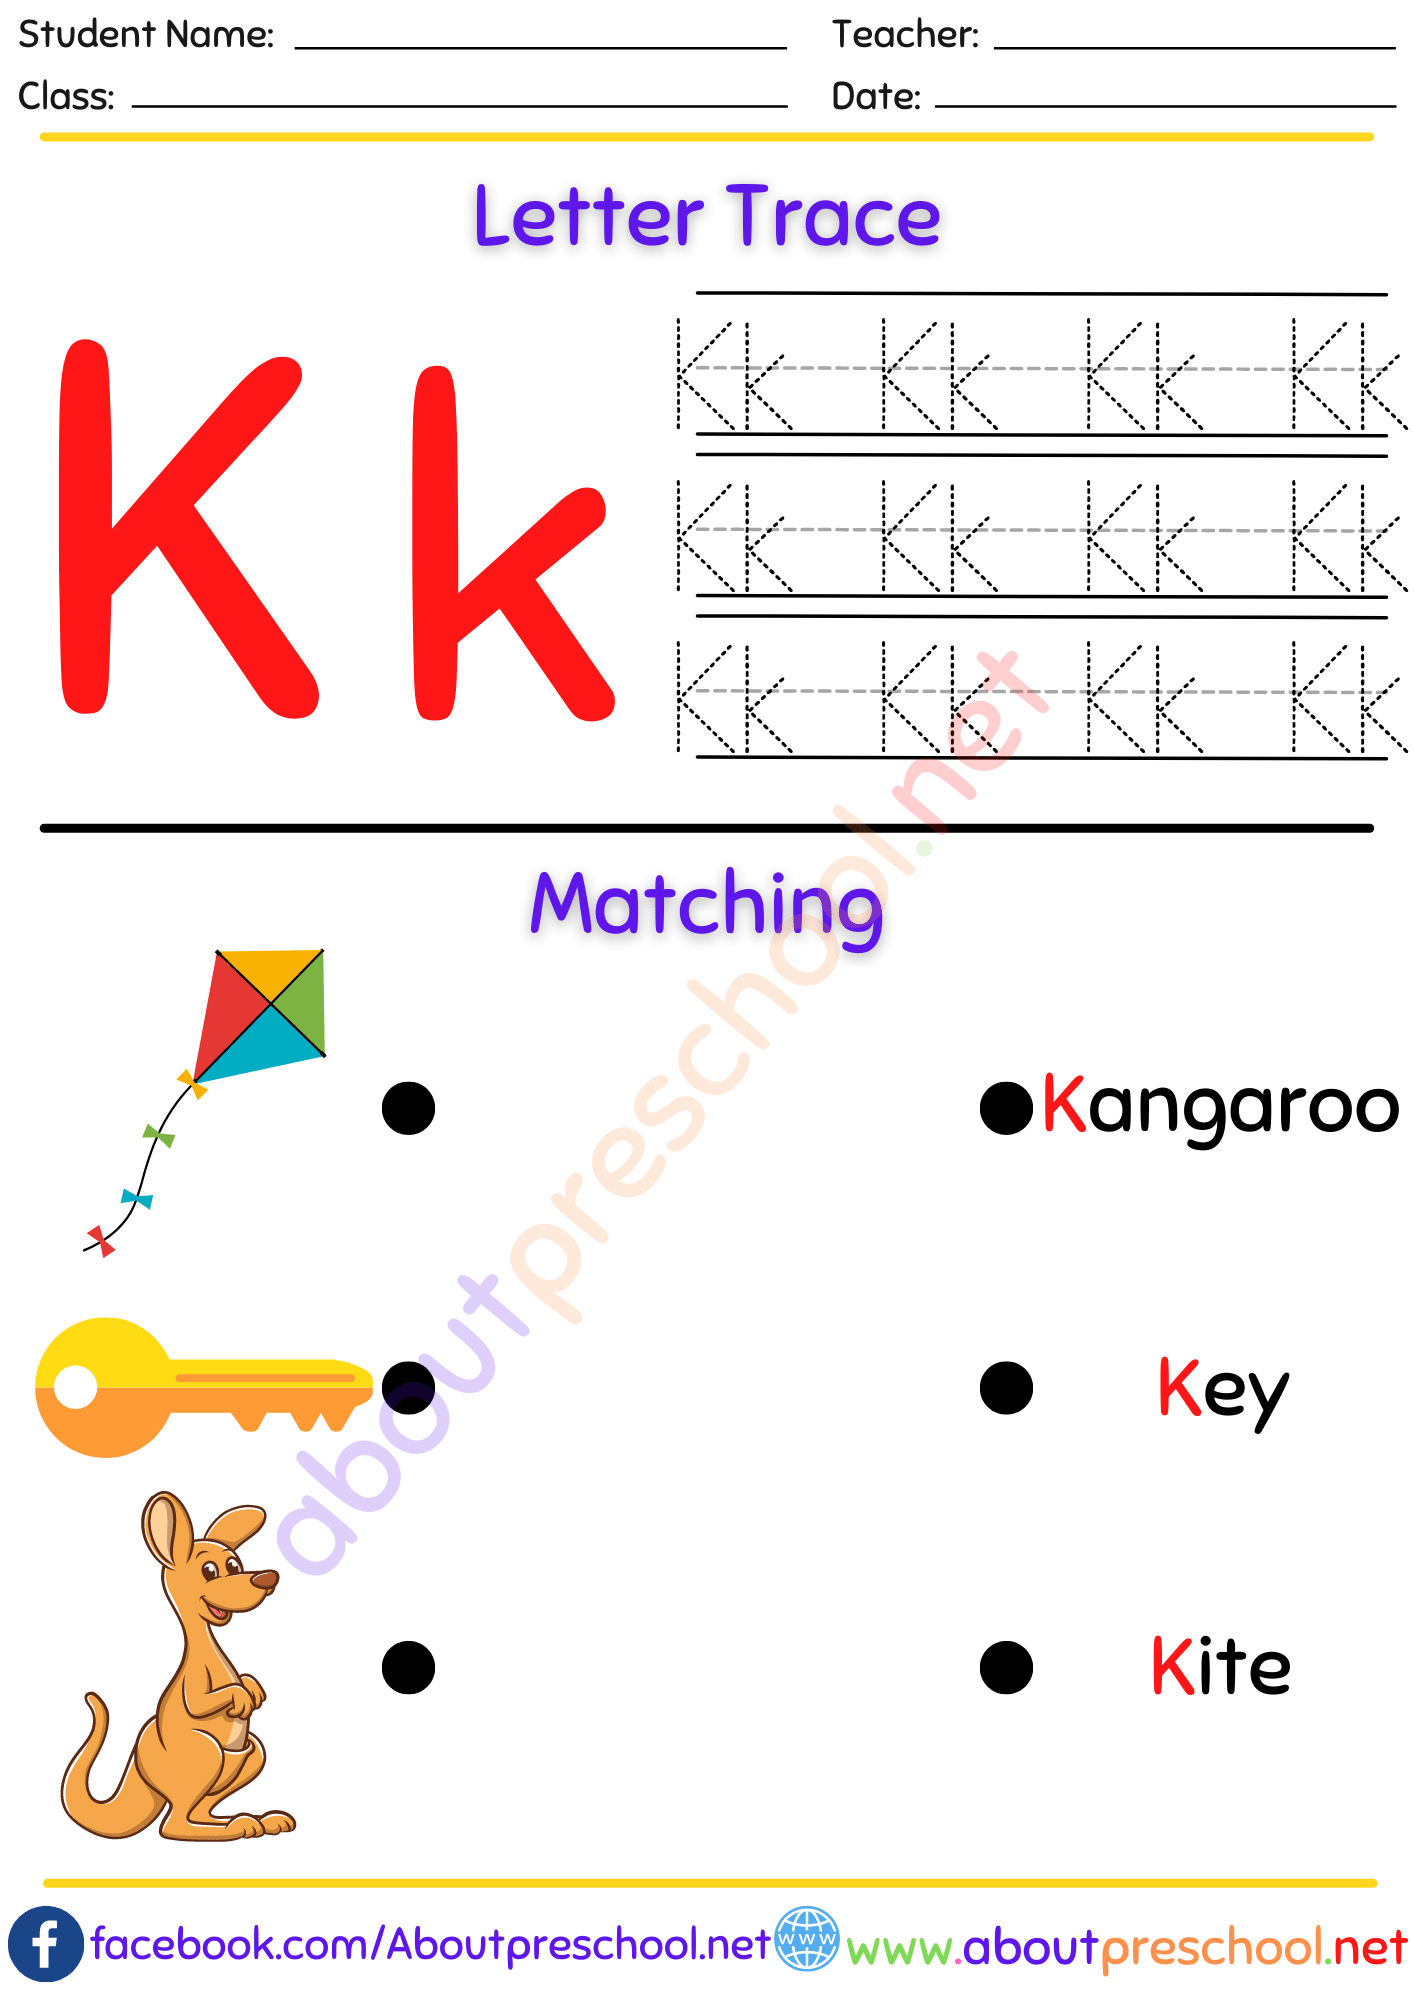 Letter Trace and Matching K